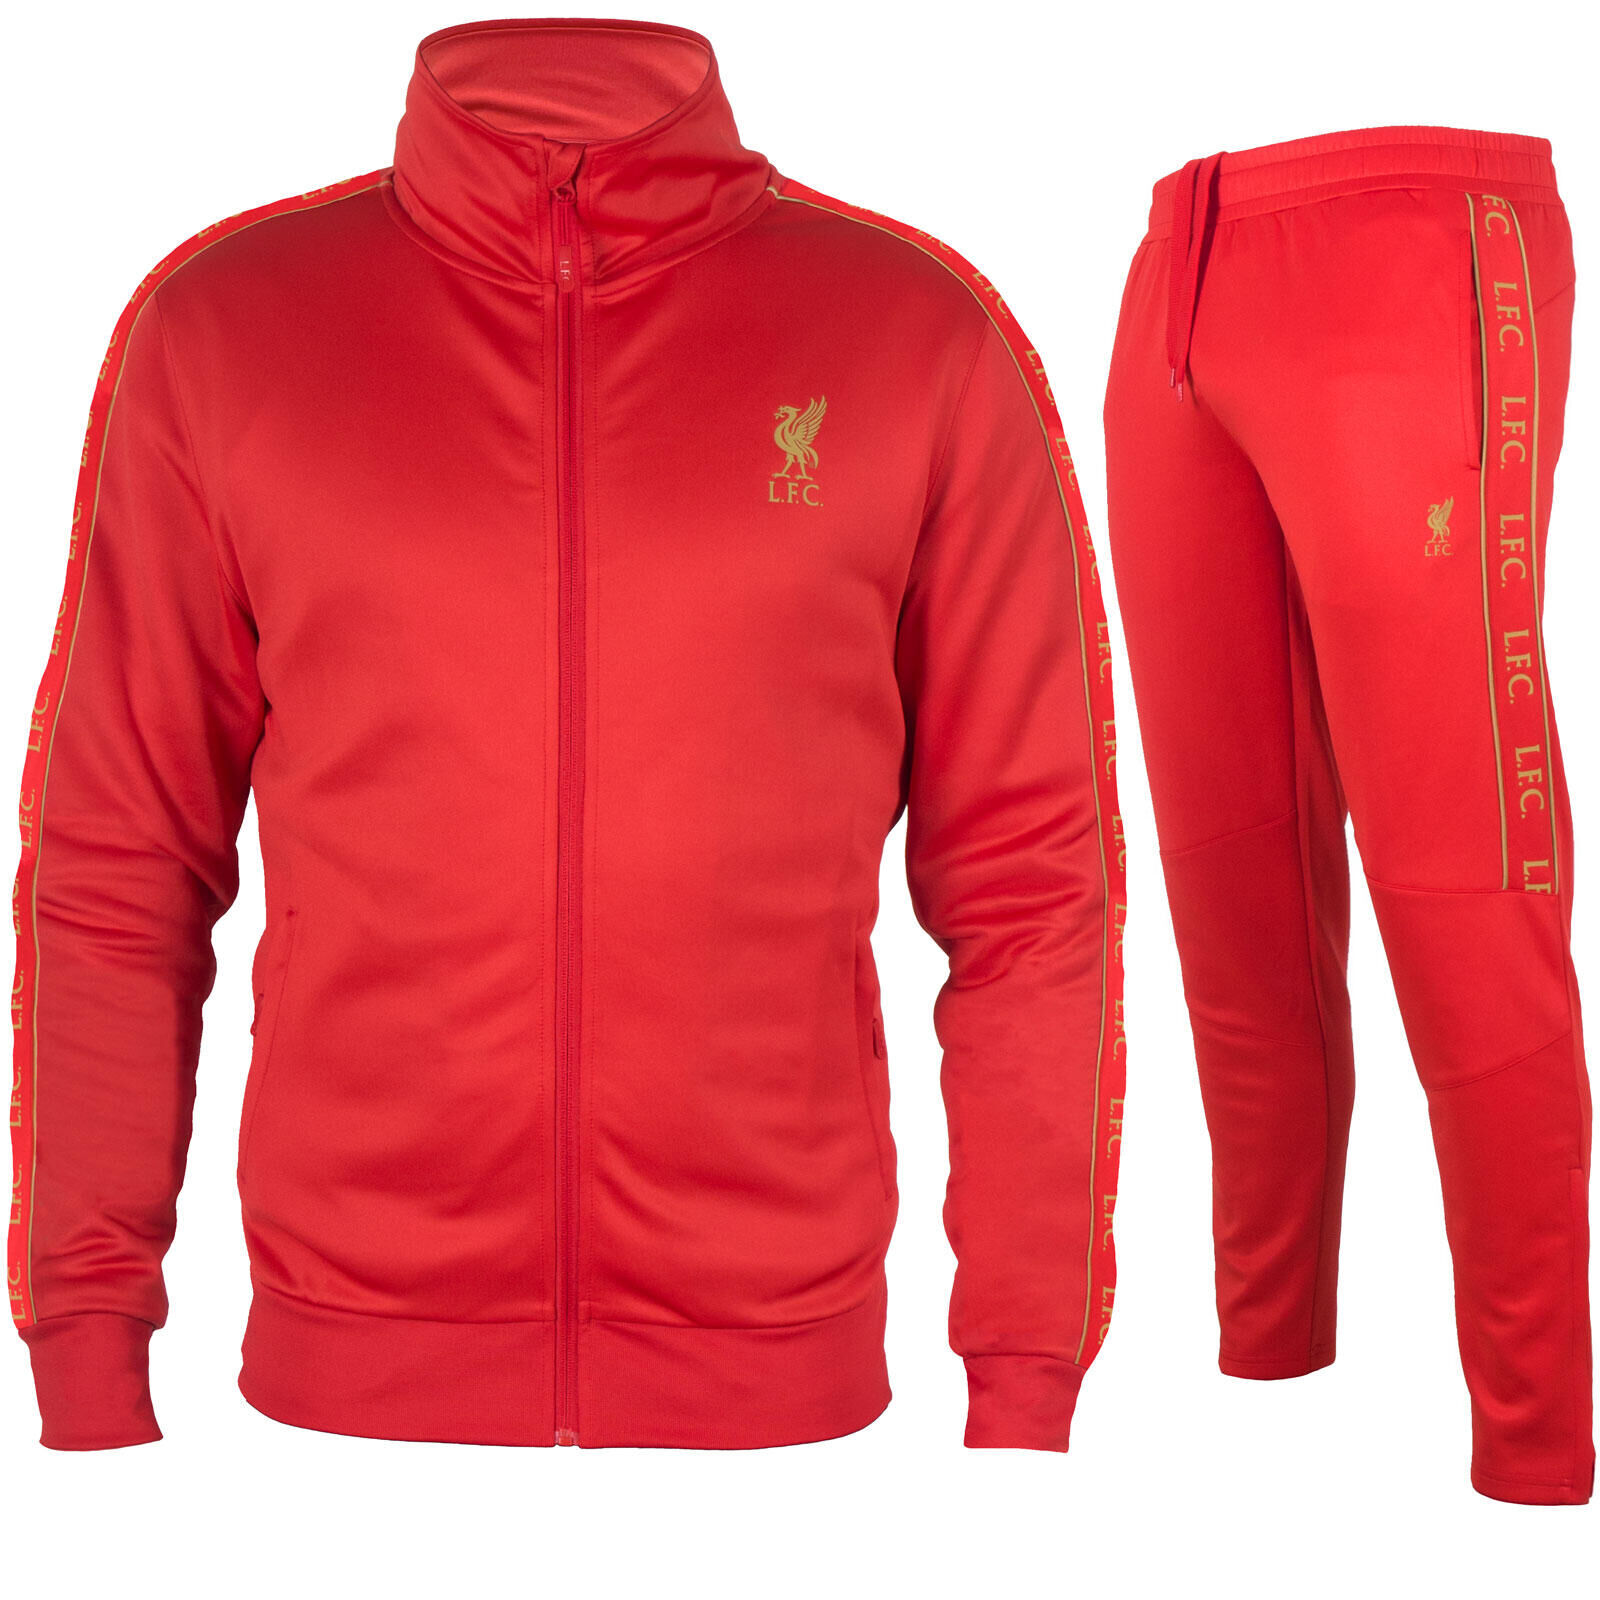 LIVERPOOL FC Liverpool FC Mens Tracksuit Poly Jacket & Pants Set OFFICIAL Football Gift